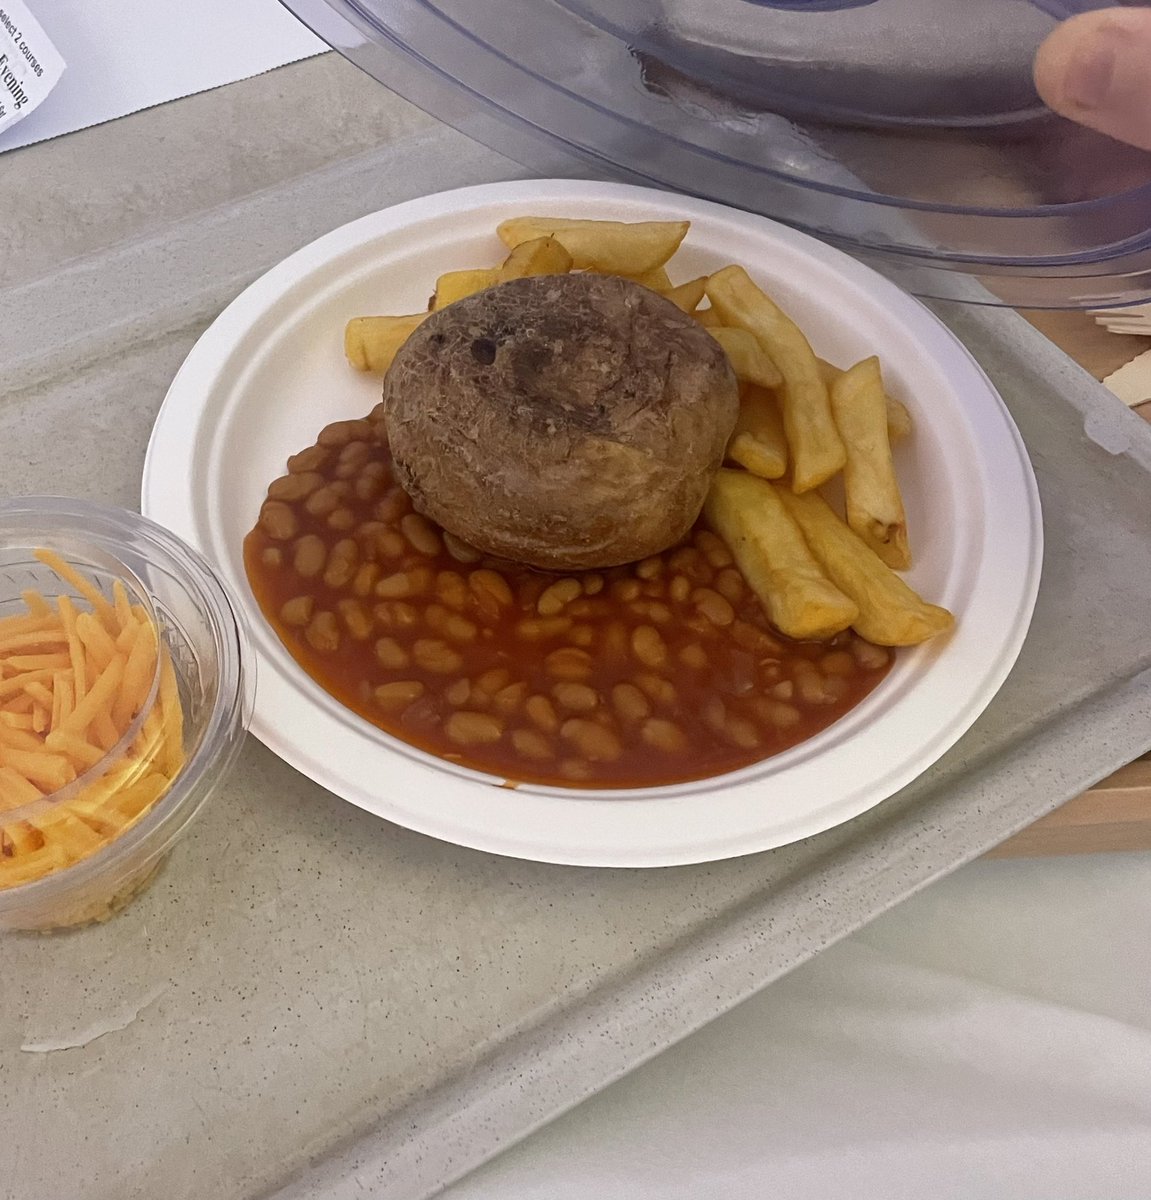 Visited quite unwell cousin in hospital. This was her supper. How does anyone come out alive? #NHS